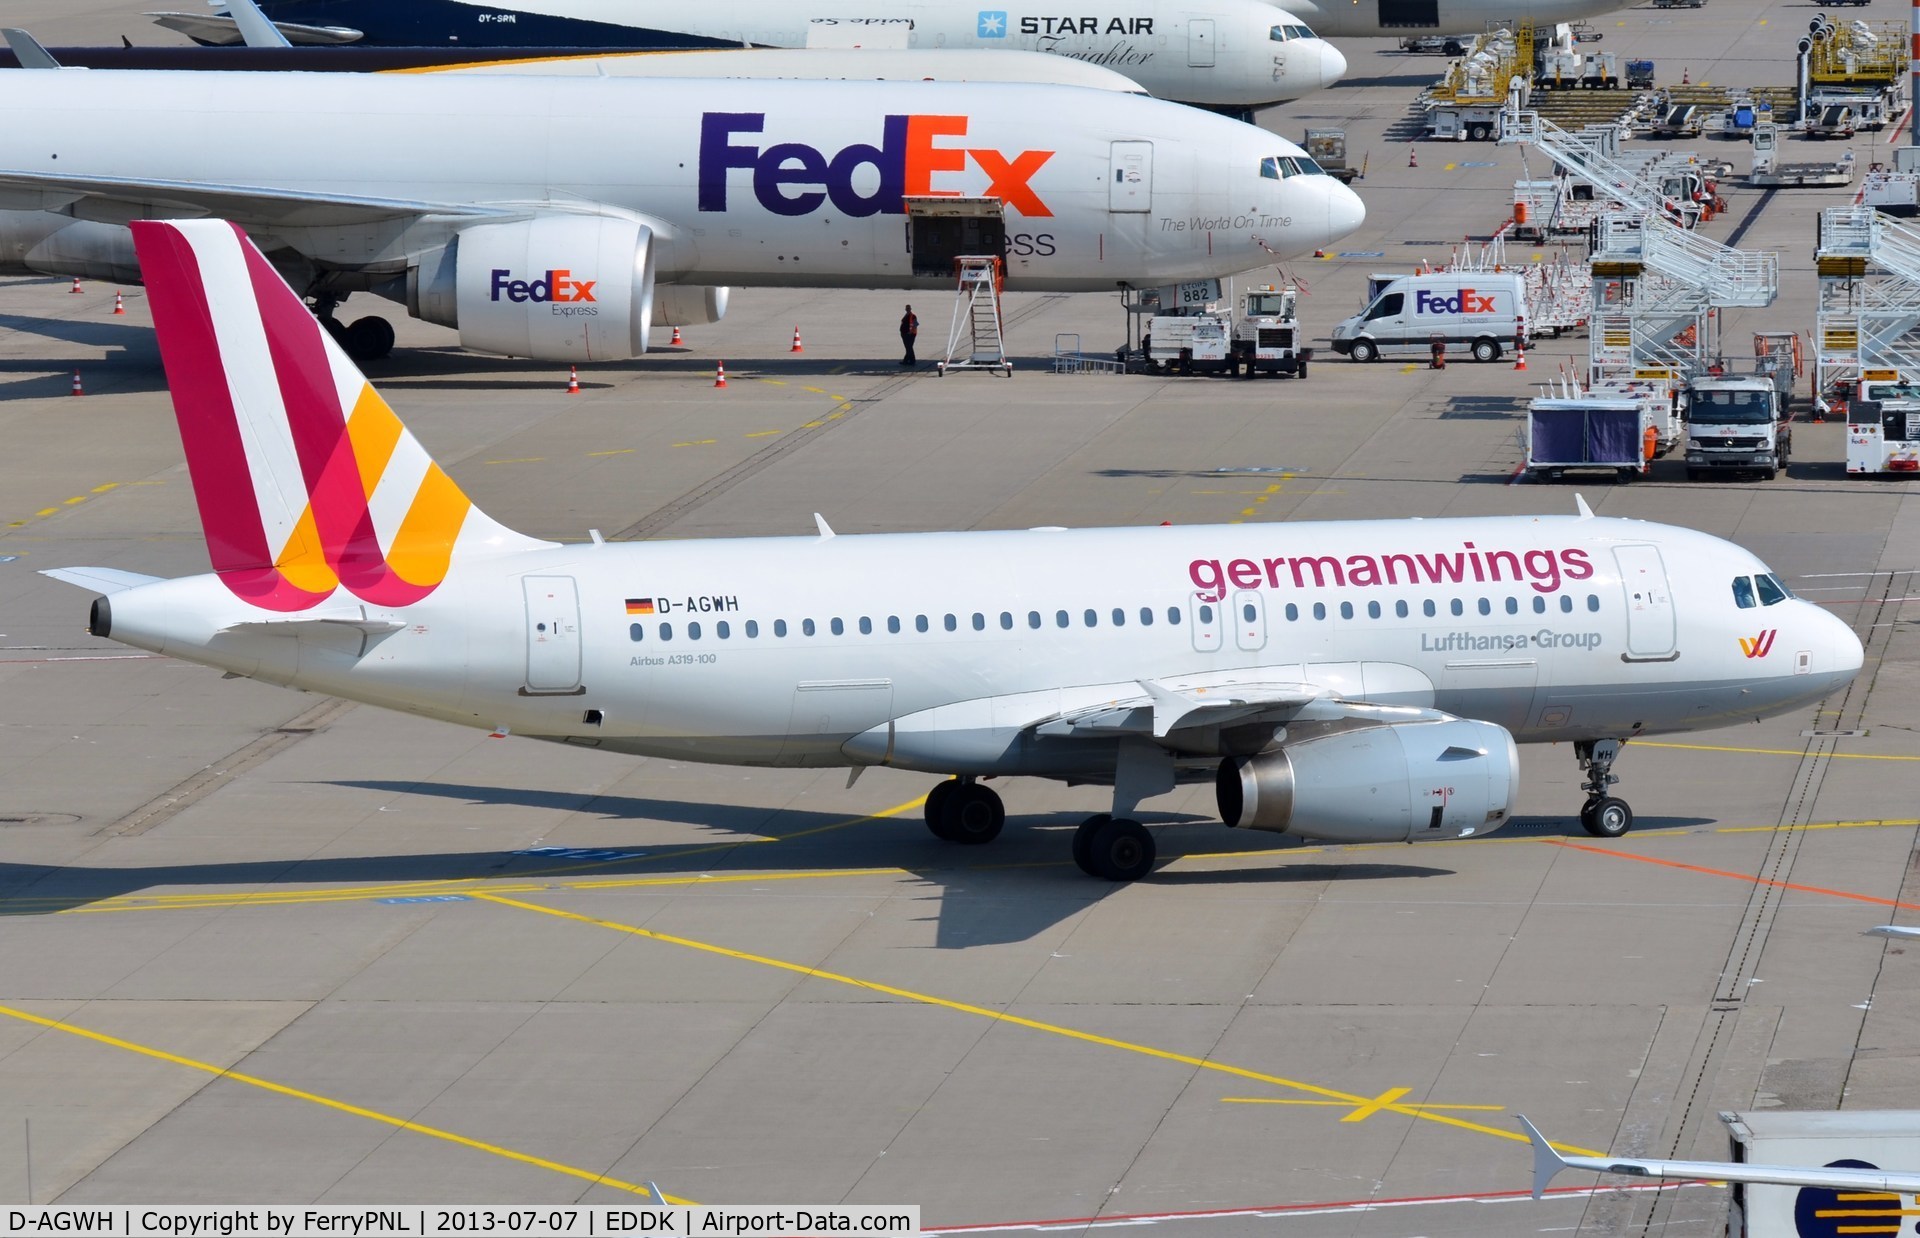 D-AGWH, 2007 Airbus A319-132 C/N 3352, Germanwings A319 taxying to its gate